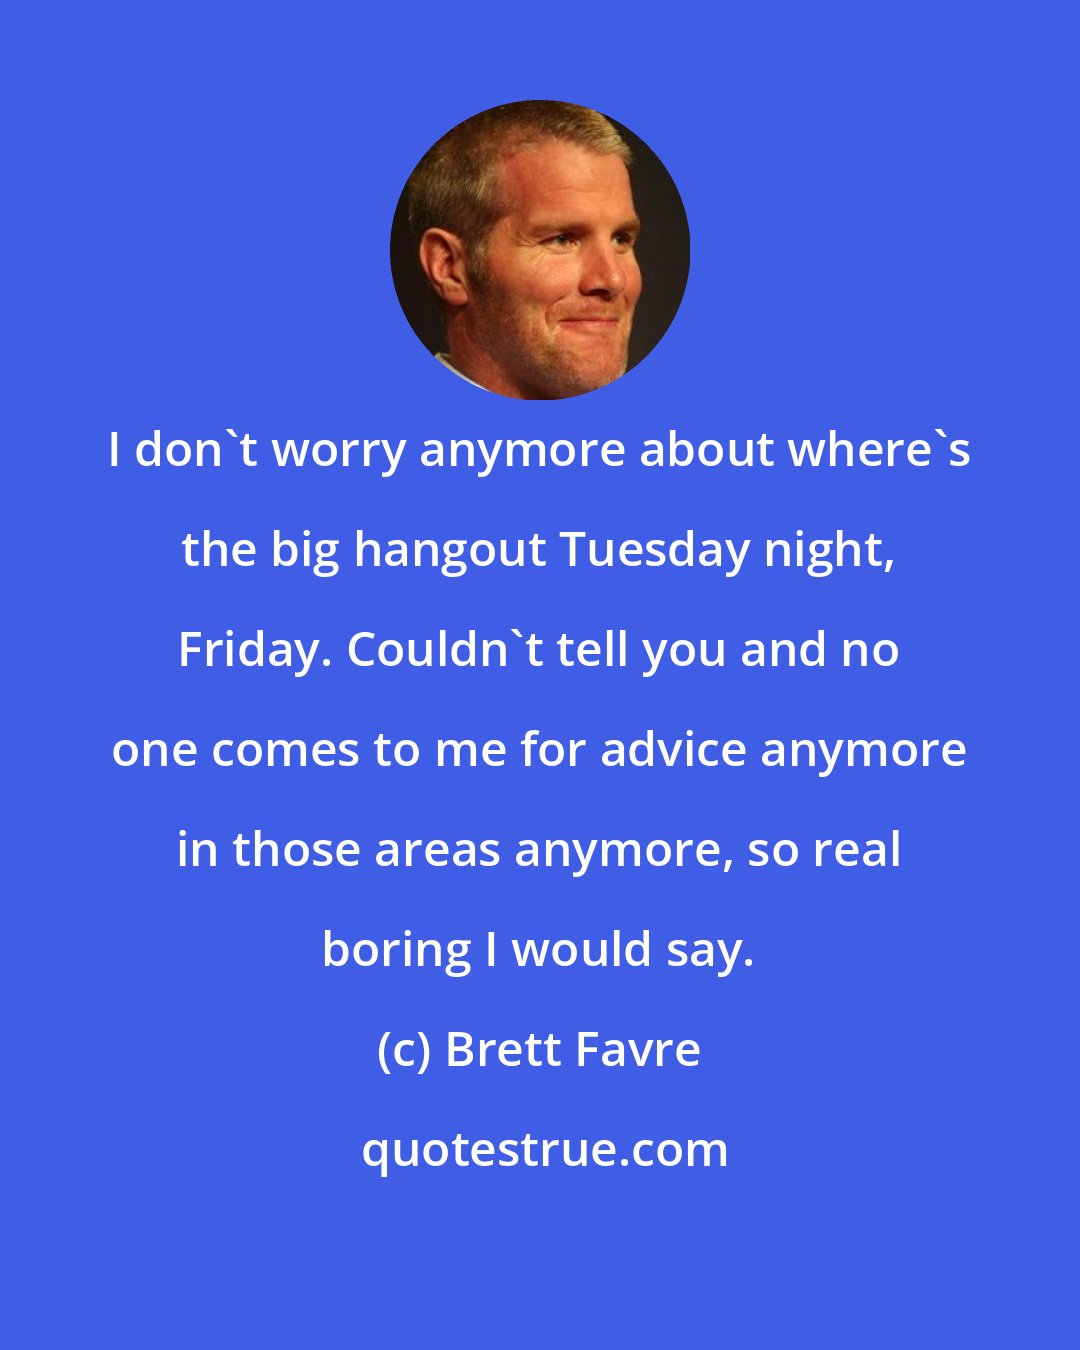 Brett Favre: I don't worry anymore about where's the big hangout Tuesday night, Friday. Couldn't tell you and no one comes to me for advice anymore in those areas anymore, so real boring I would say.